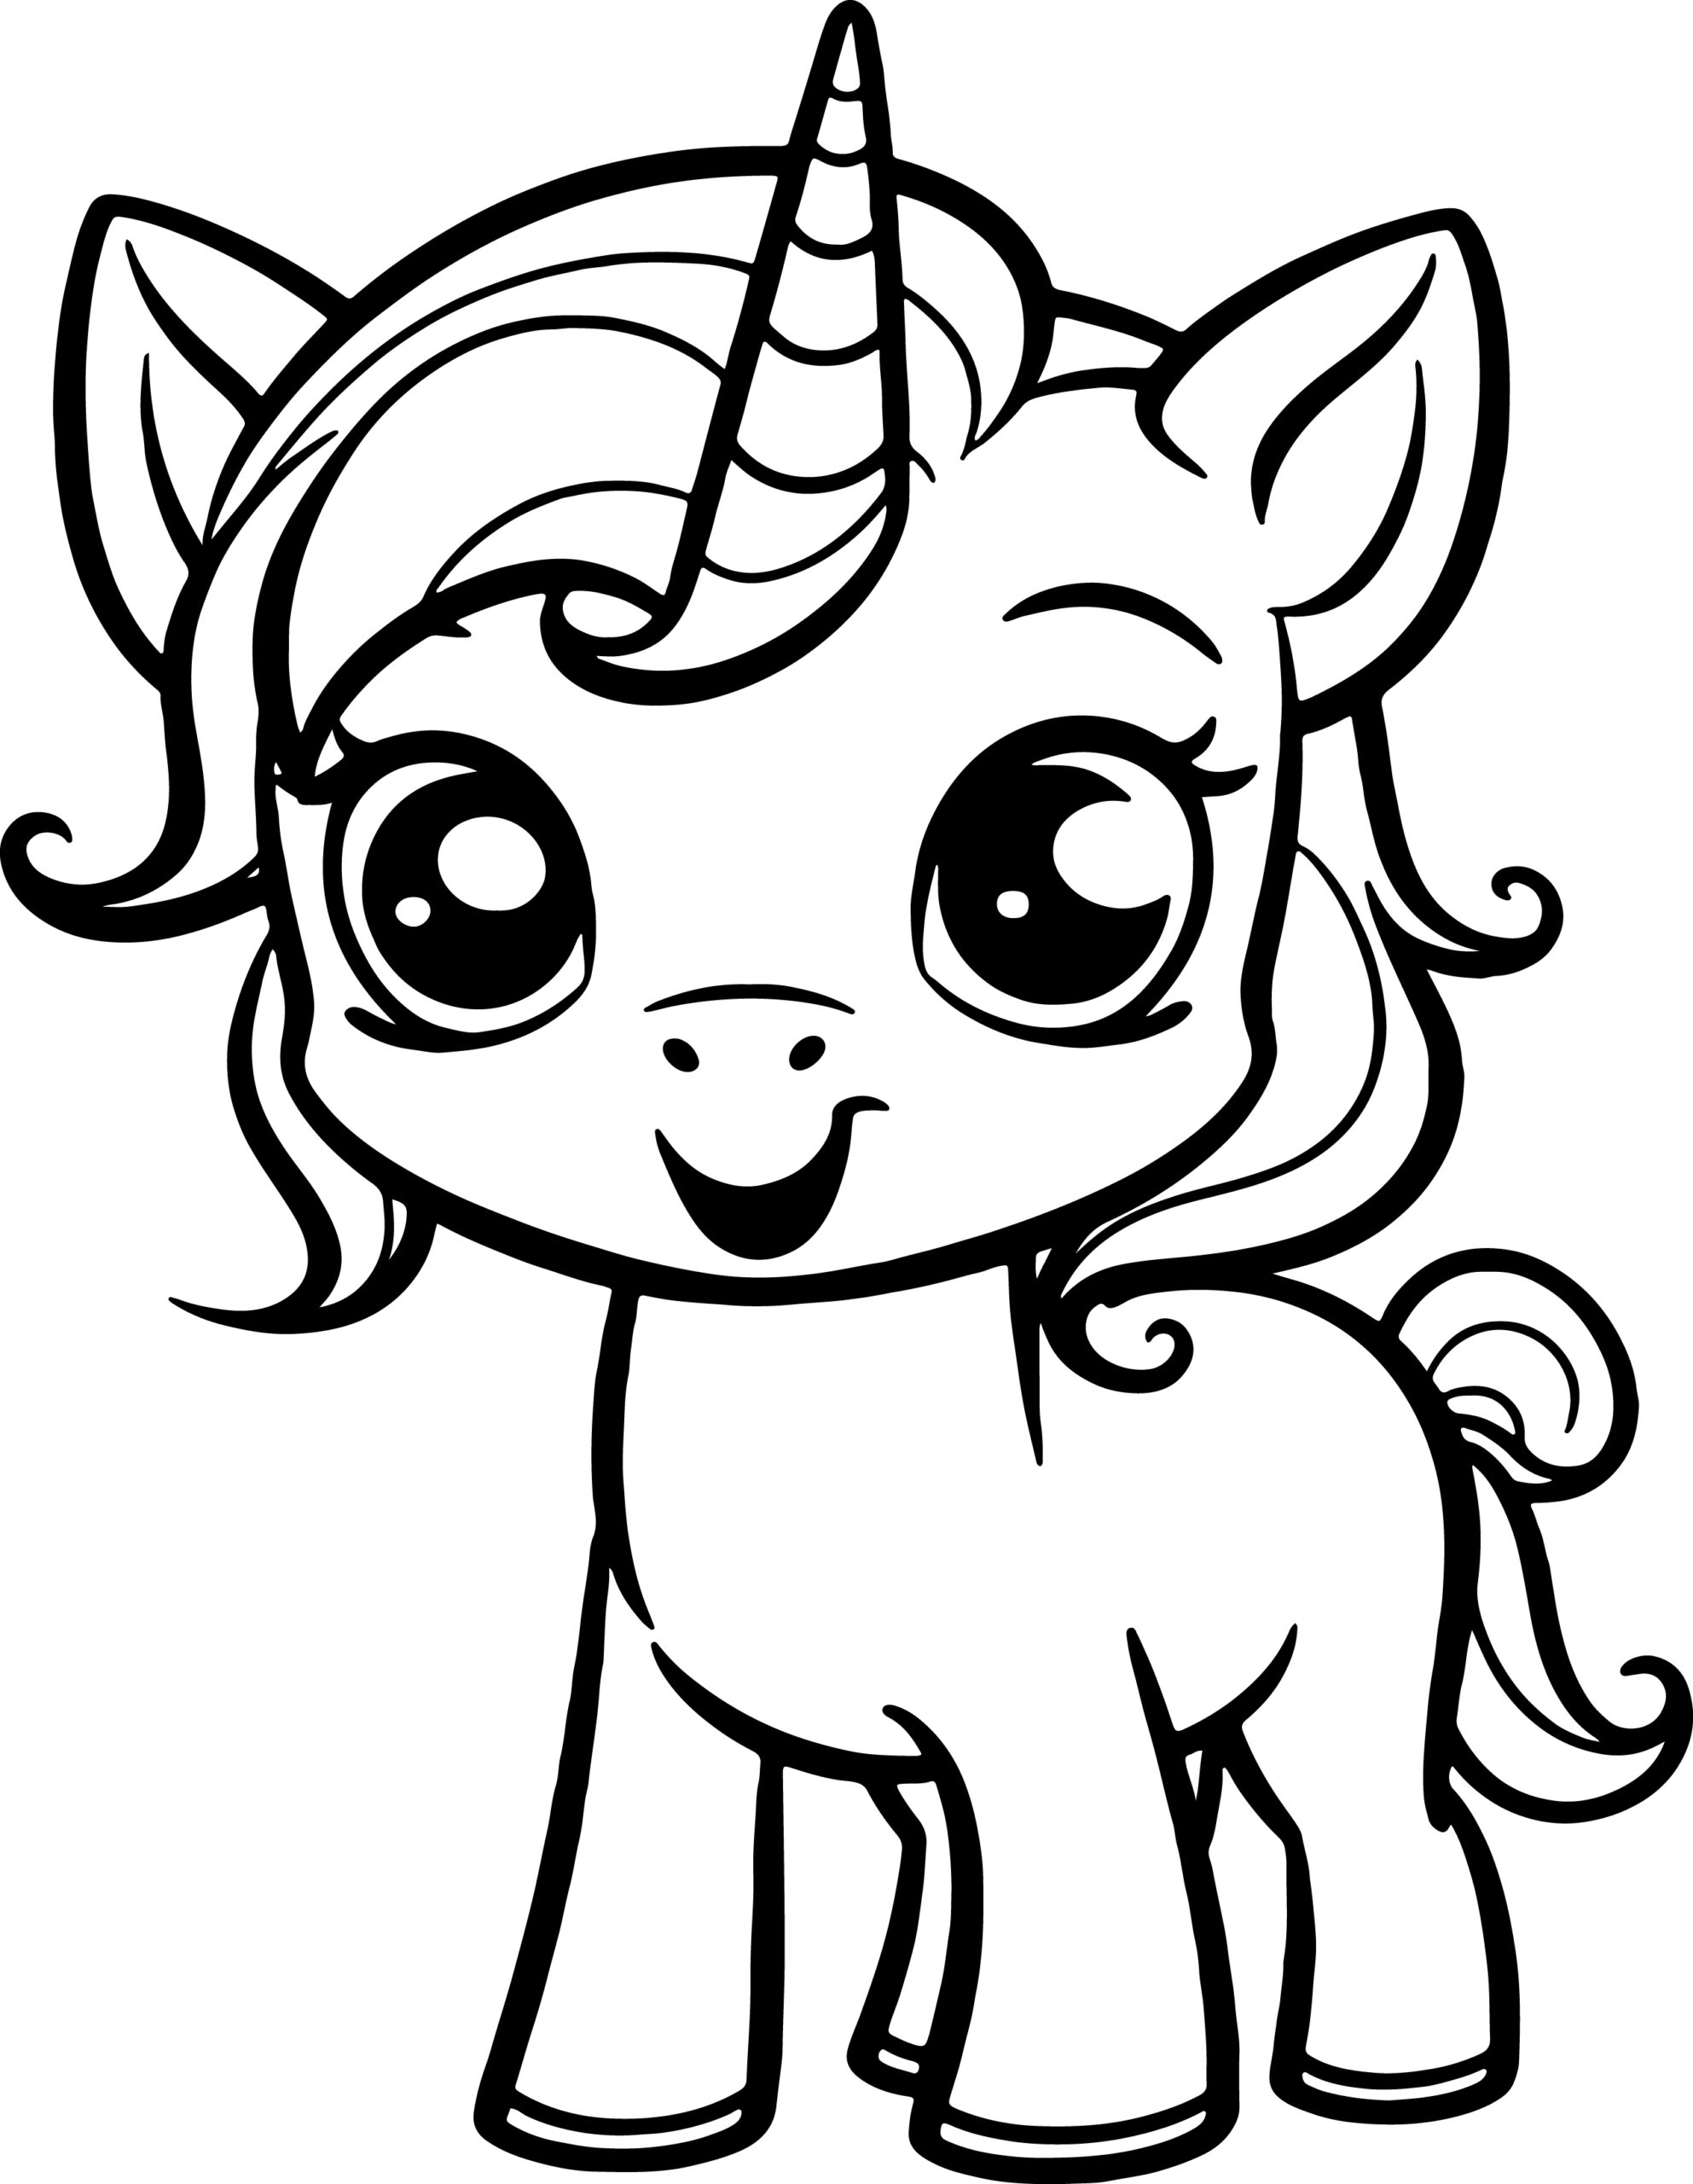 Beautiful unicorn coloring book for kids unicorn coloring pages made by teachers